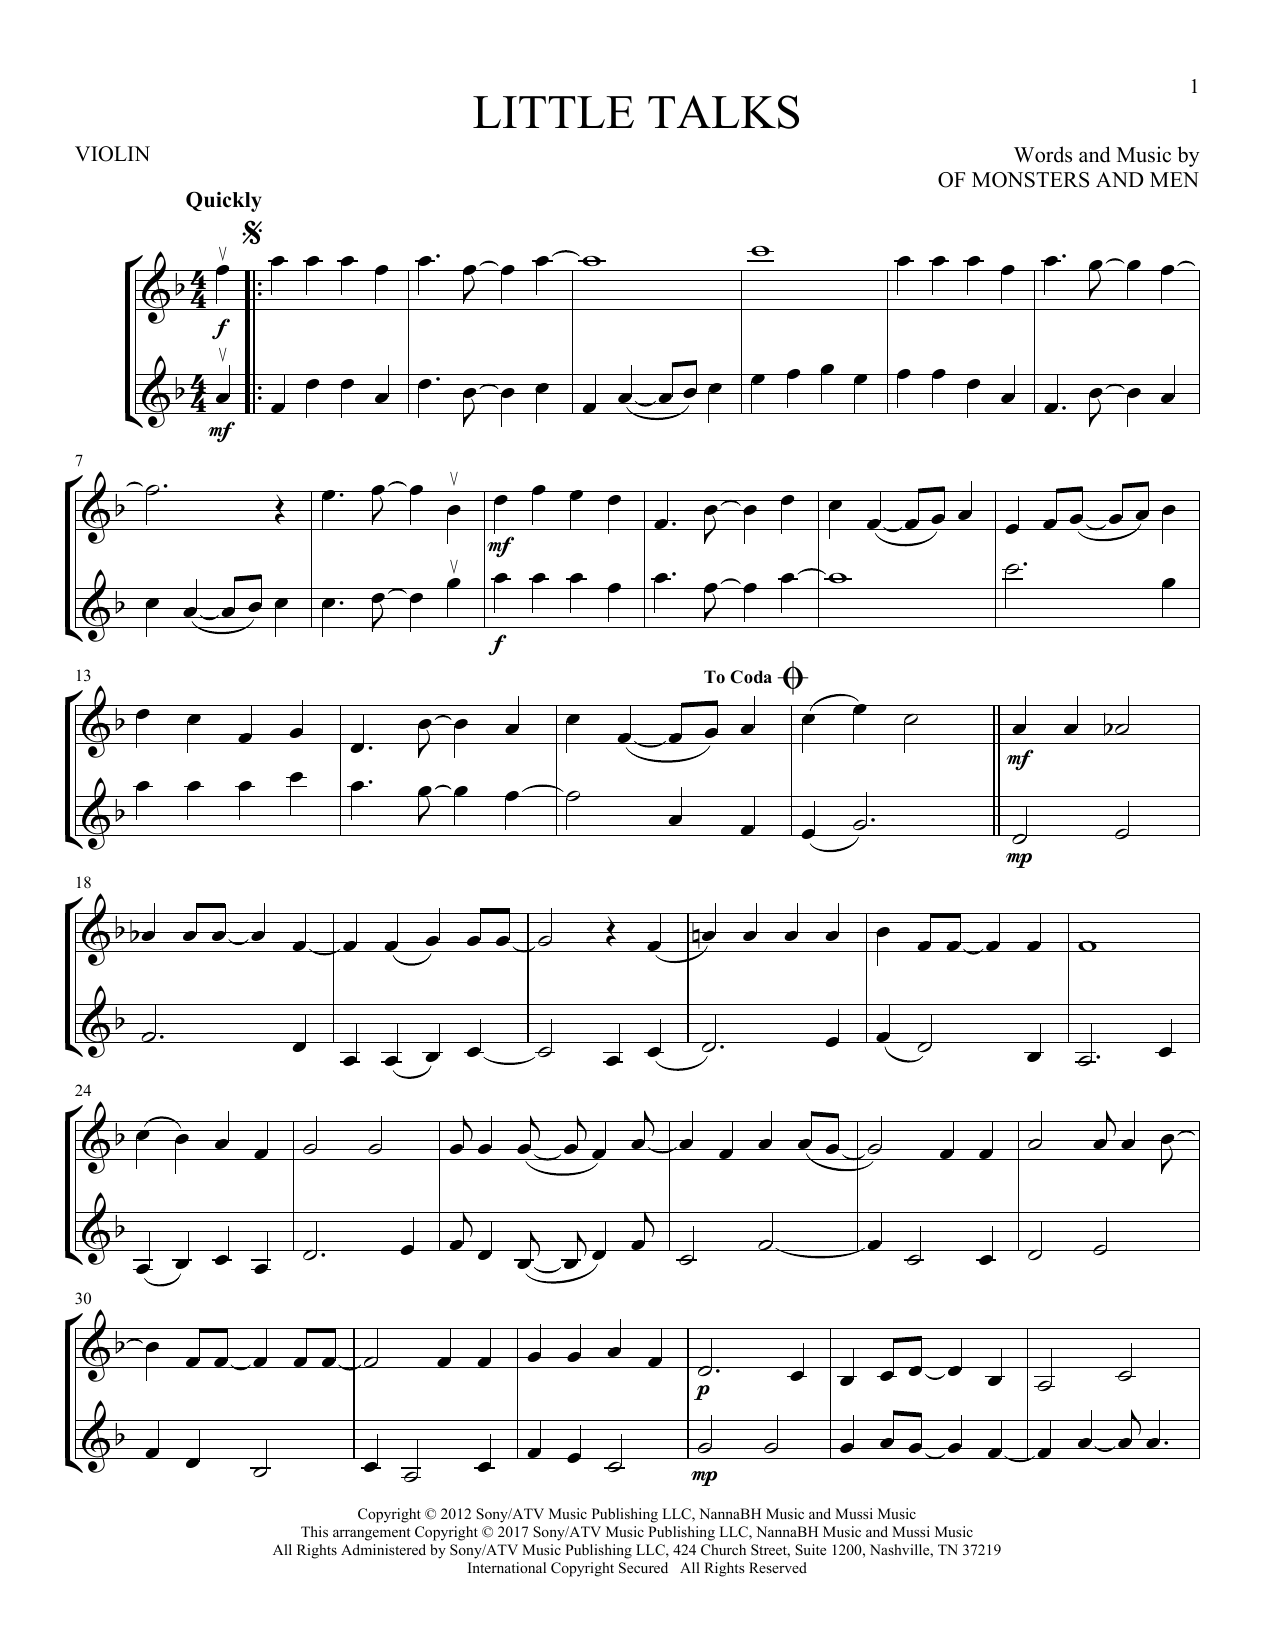 Download Of Monsters And Men Little Talks Sheet Music